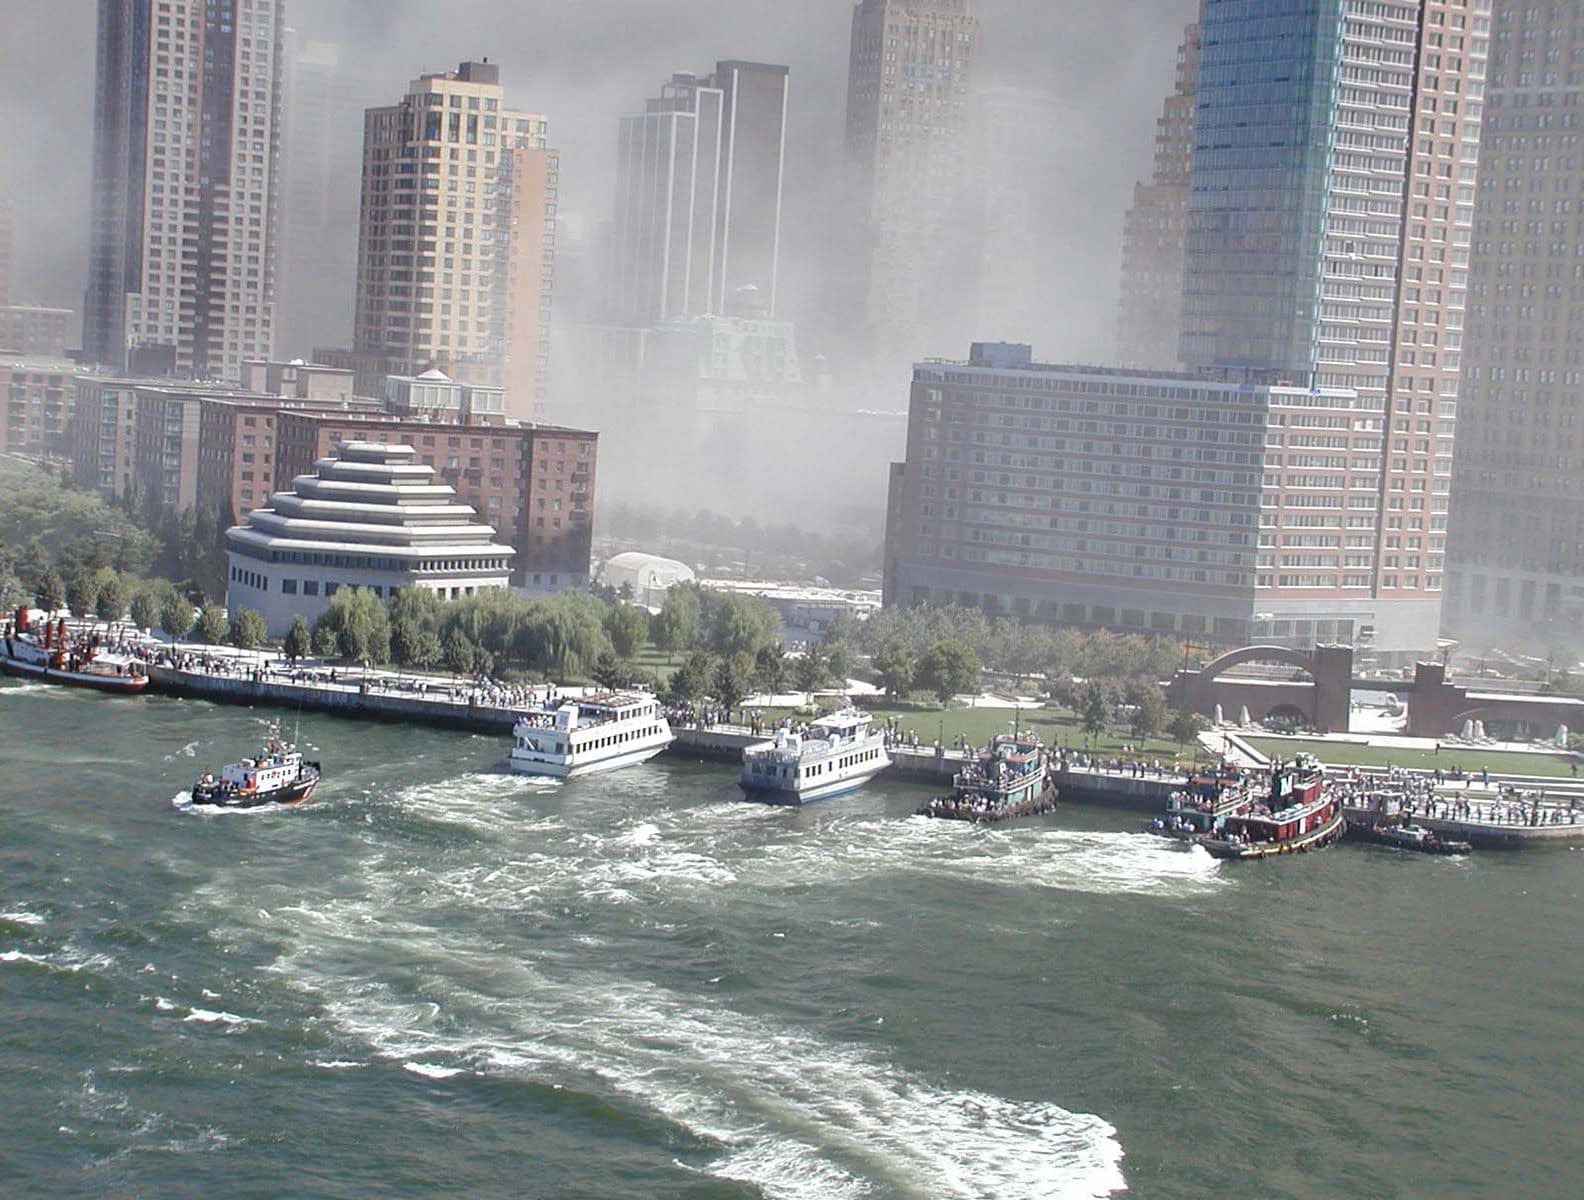 September 11, 2001 evacuation from Lower Manhattan, also known as the 9/11 Boatlift